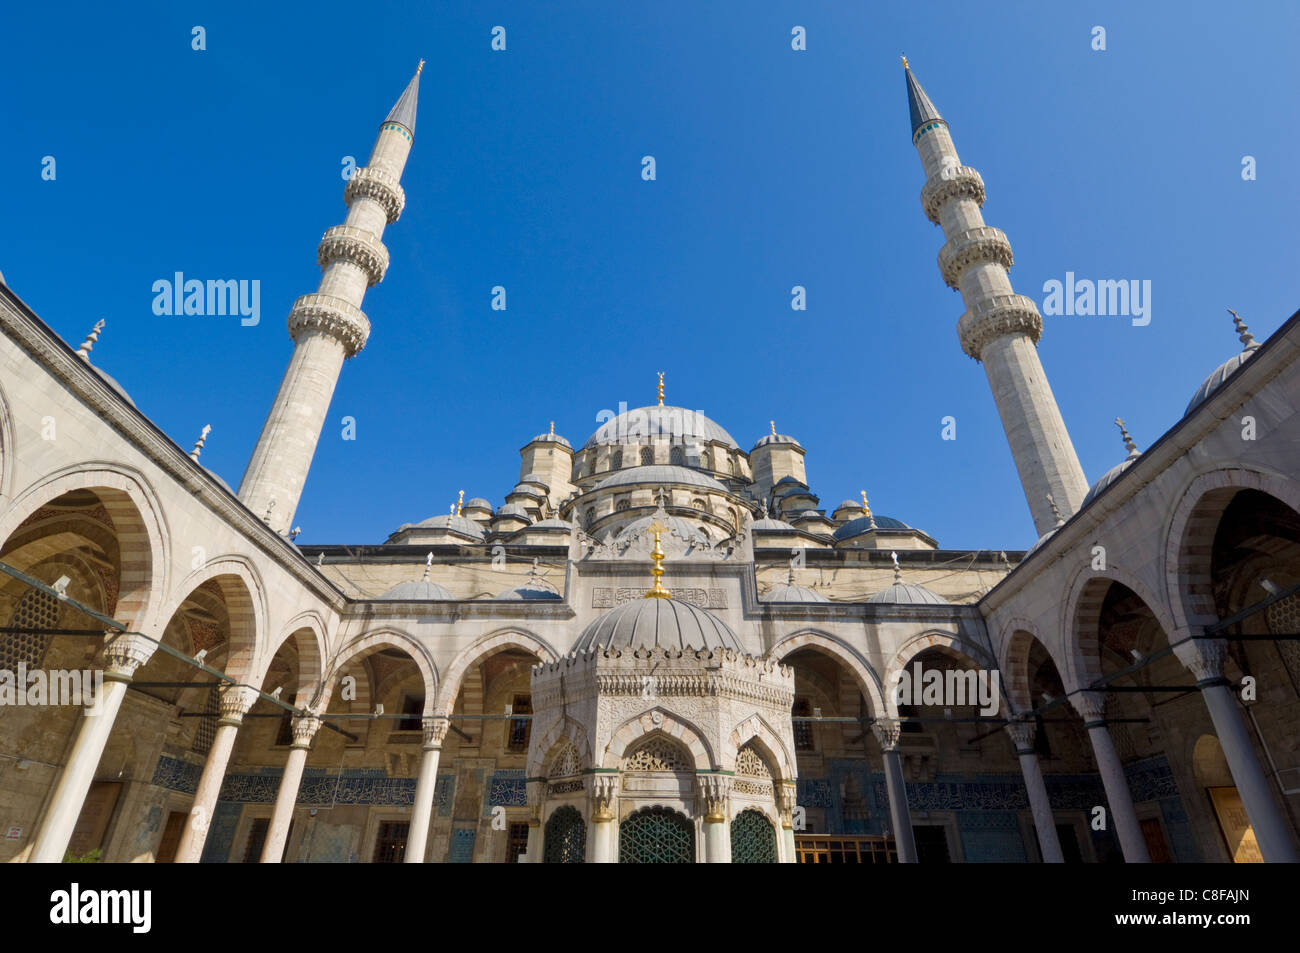 Inside view of the courtyard and Ablutions fountain of the Yeni Cami (New Mosque, Eminonu, Istanbul, Turkey Stock Photo